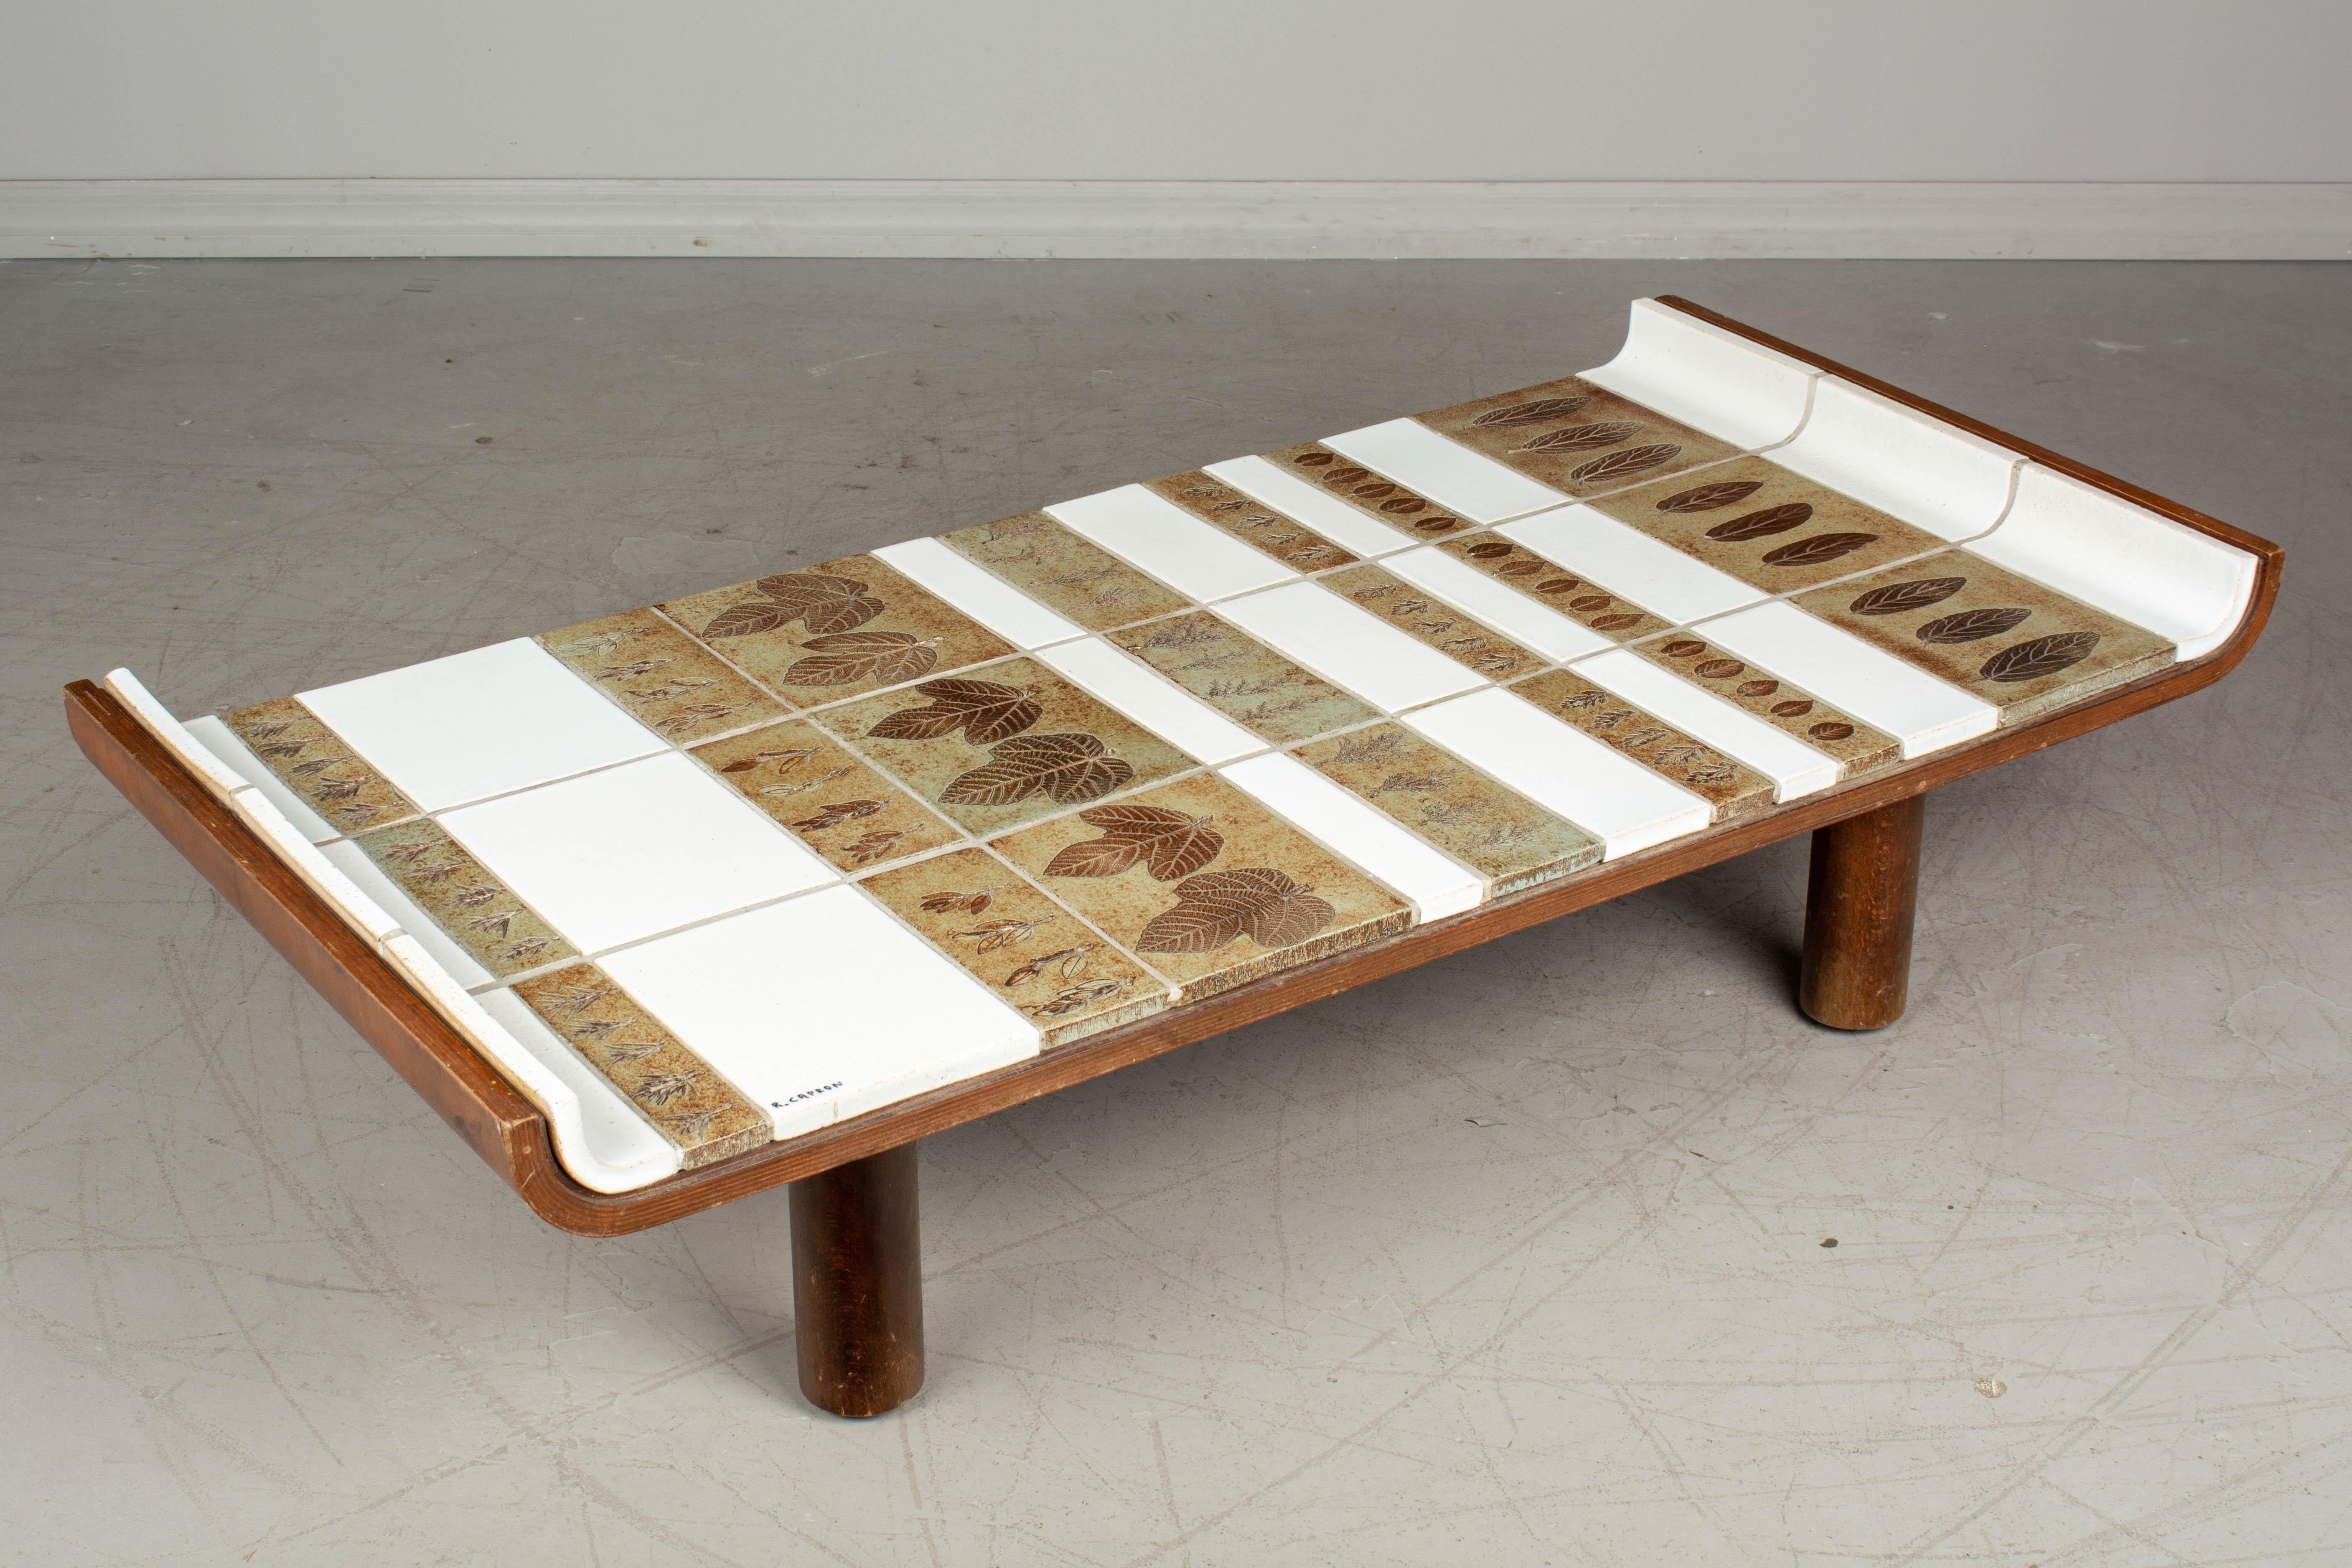 A French Mid-Century Modern Roger Capron pagode model ceramic tile coffee table. Oak frame with upturned edges and solid pillar legs. White glazed tiles and brown and greenish tone ceramic tiles with impressed leaves. Signed R. Capron. Small loss to